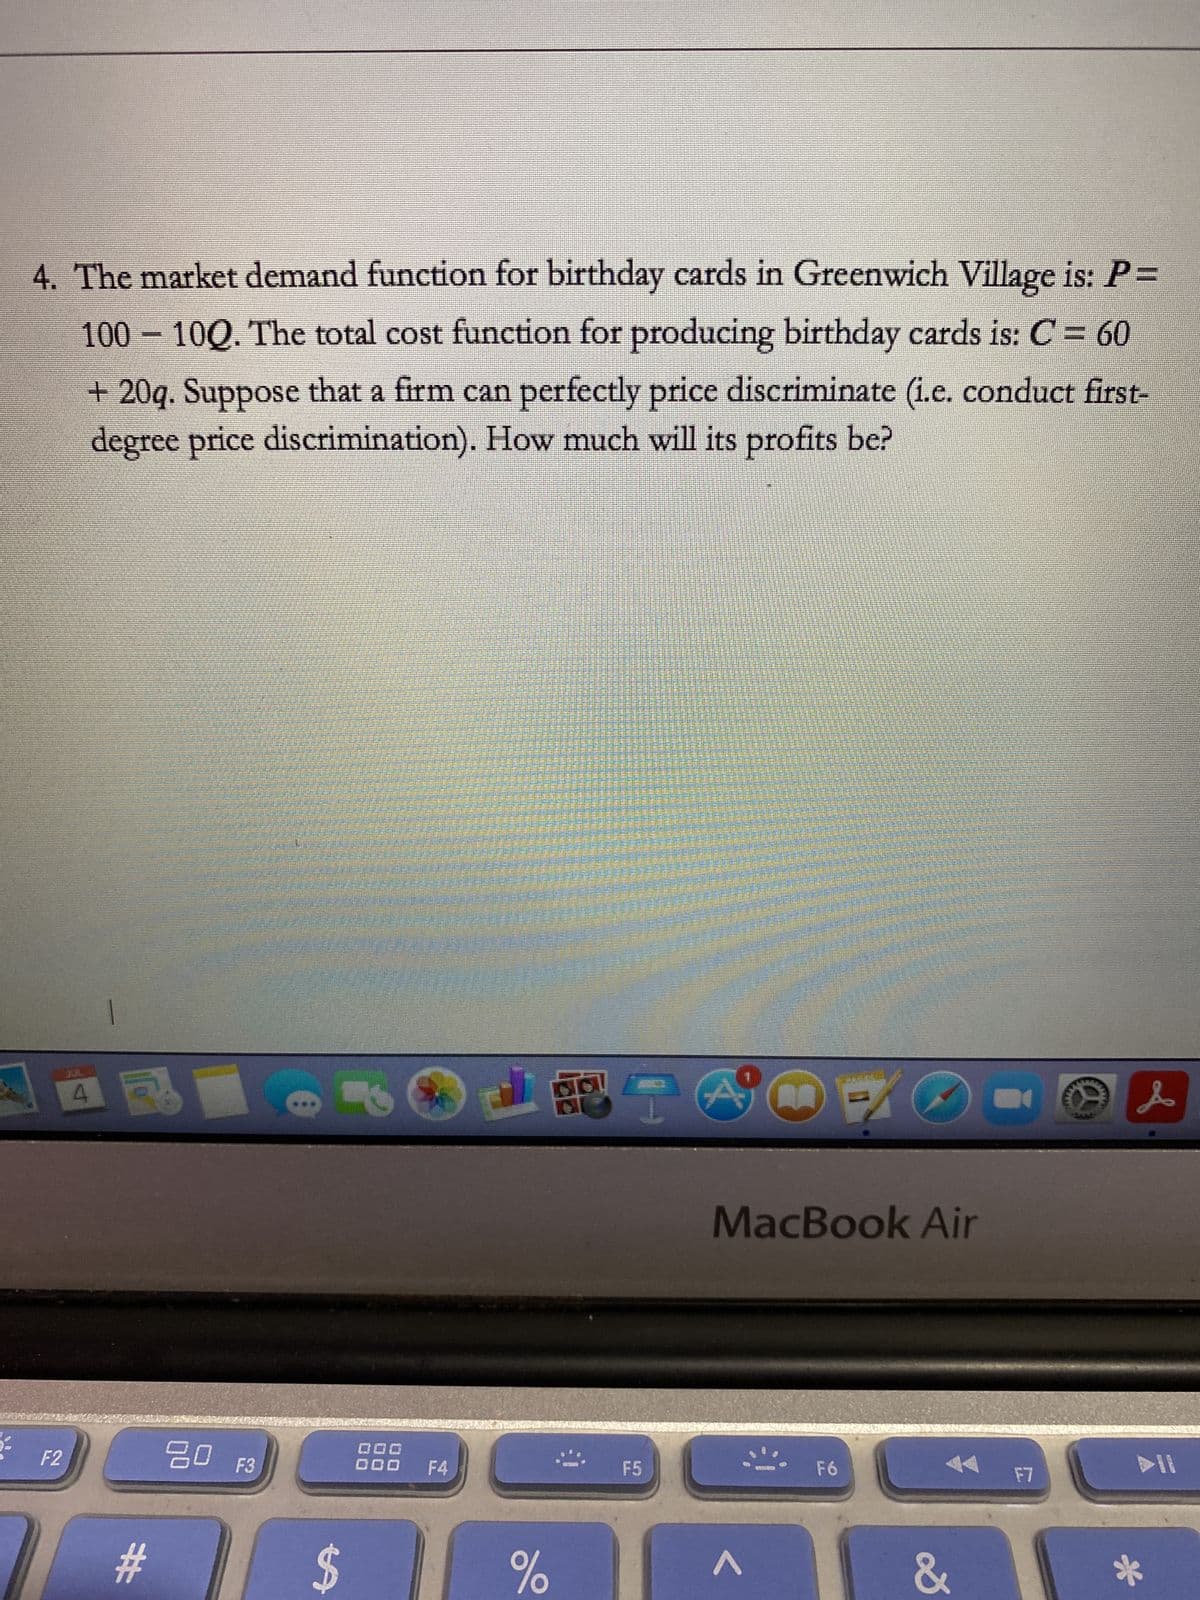 4. The market demand function for birthday cards in Greenwich Village is: P=
100 - 100. The total cost function for producing birthday cards is: C = 60
+ 20q. Suppose that a firm can perfectly price discriminate (i.e. conduct first-
degree price discrimination). How much will its profits be?
F2
#
20 F3
$
IS
DOD
000 F4
LRING
%
F5
E
MacBook Air
F6
&
F7
L
*